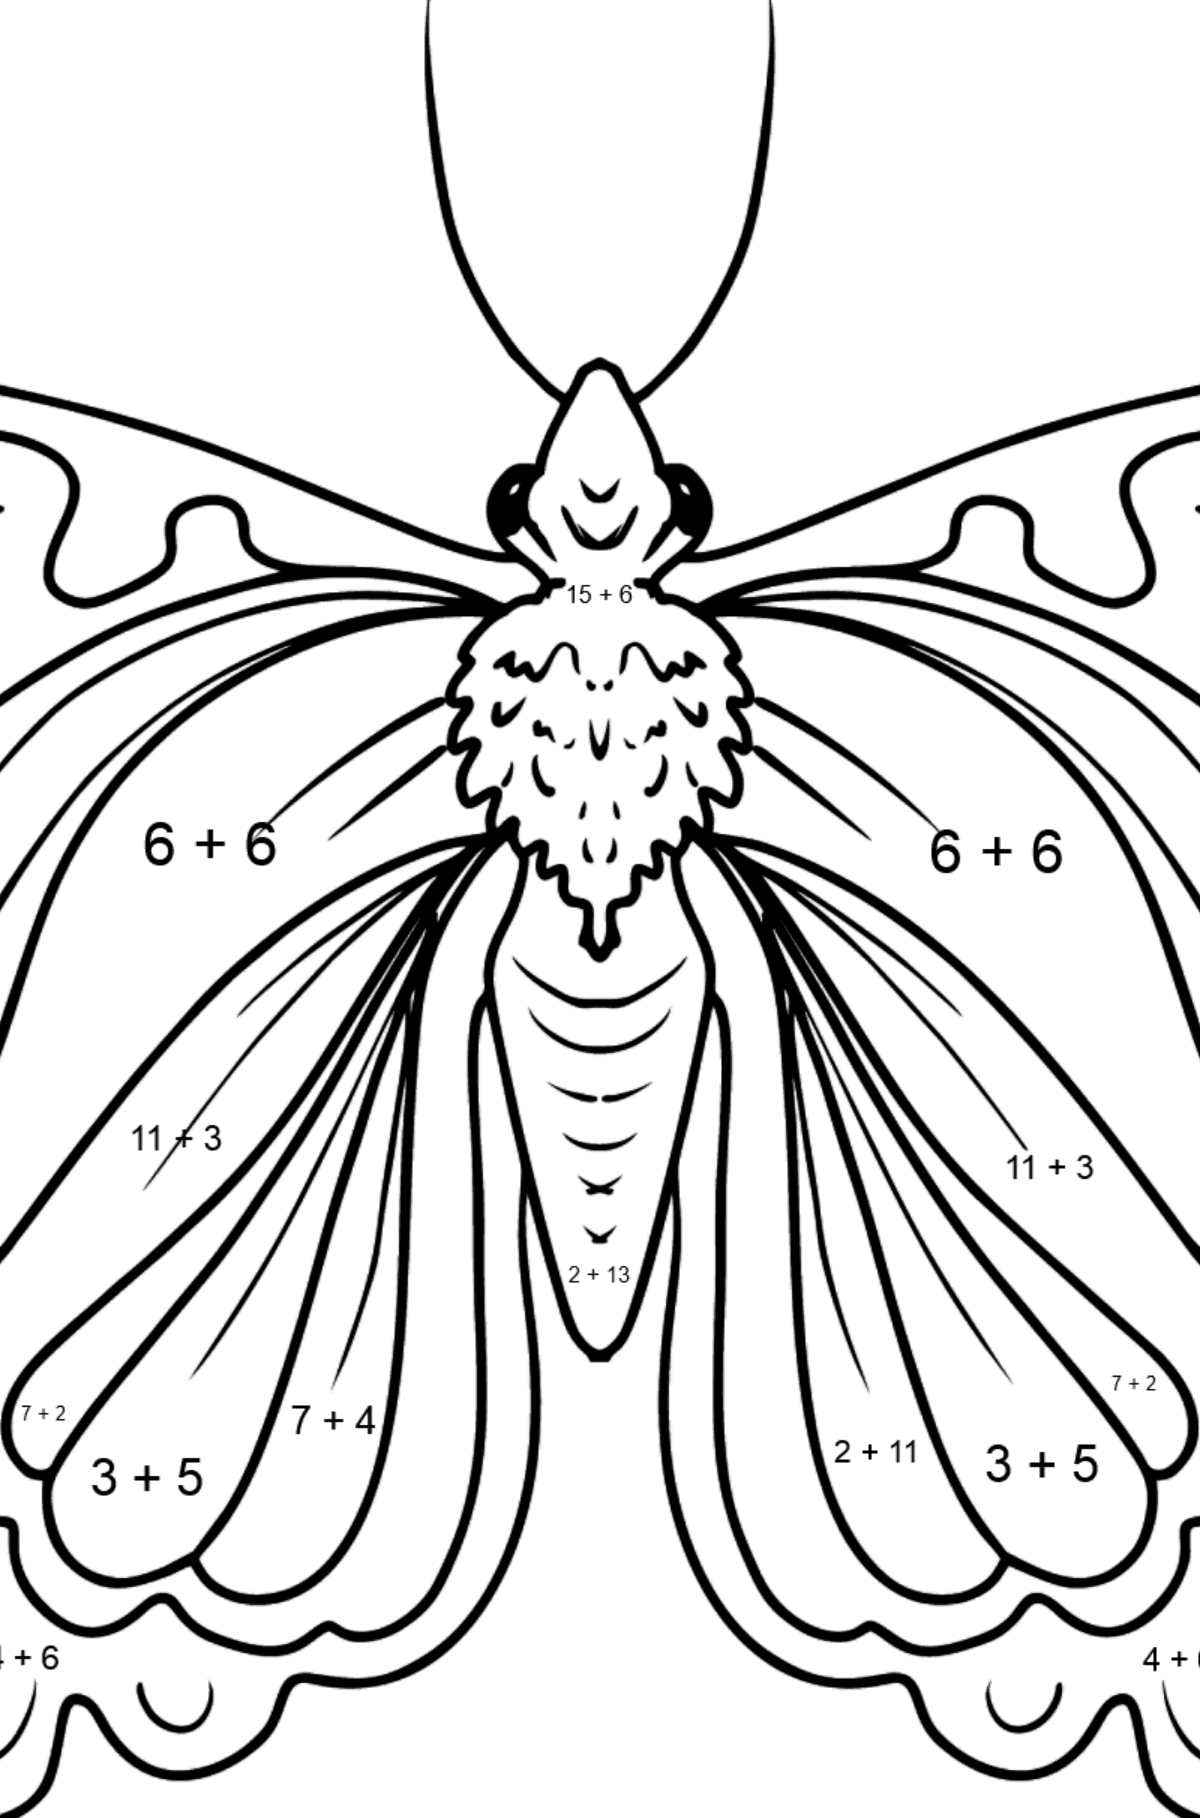 Cute Butterfly coloring page - Math Coloring - Addition for Kids